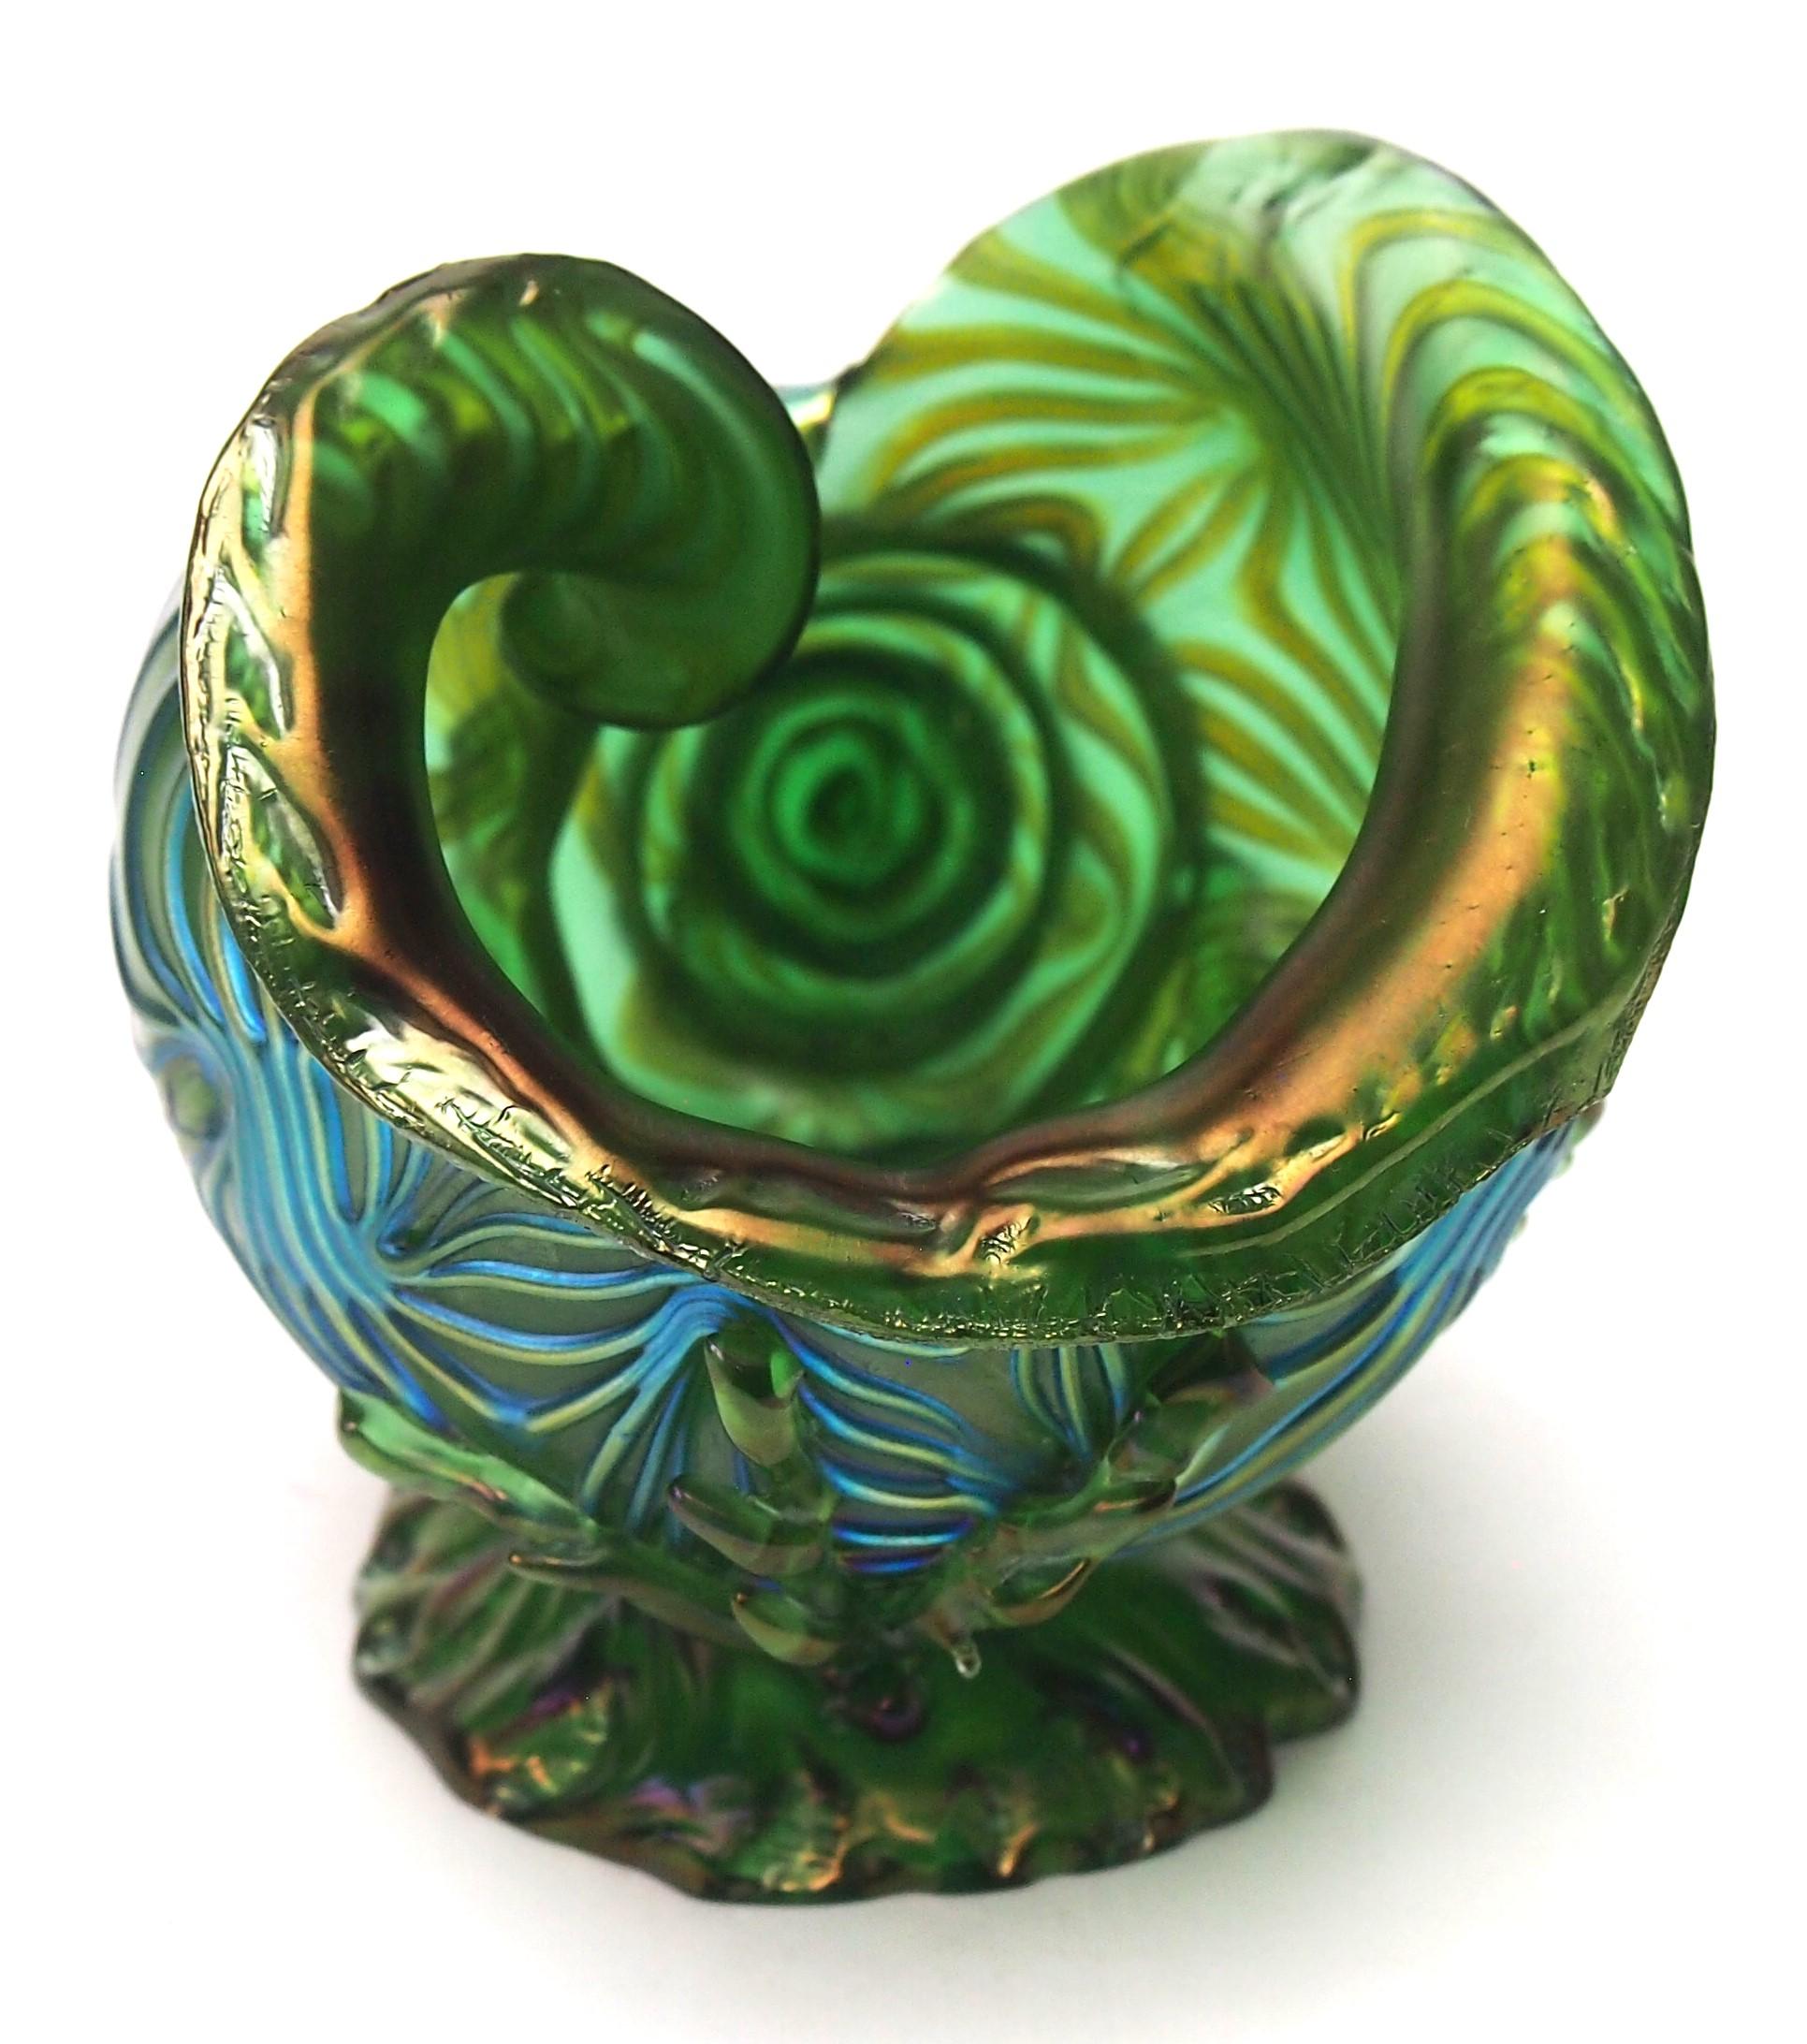 A Loetz Crete Formose seashell vase in green with blue highlights; an effect designed to look like waves - hence the name. The spiral Seashell appears to reside on a rocky outcrop 'at the bottom of the sea' and is surrounded by fine seaweed trails.